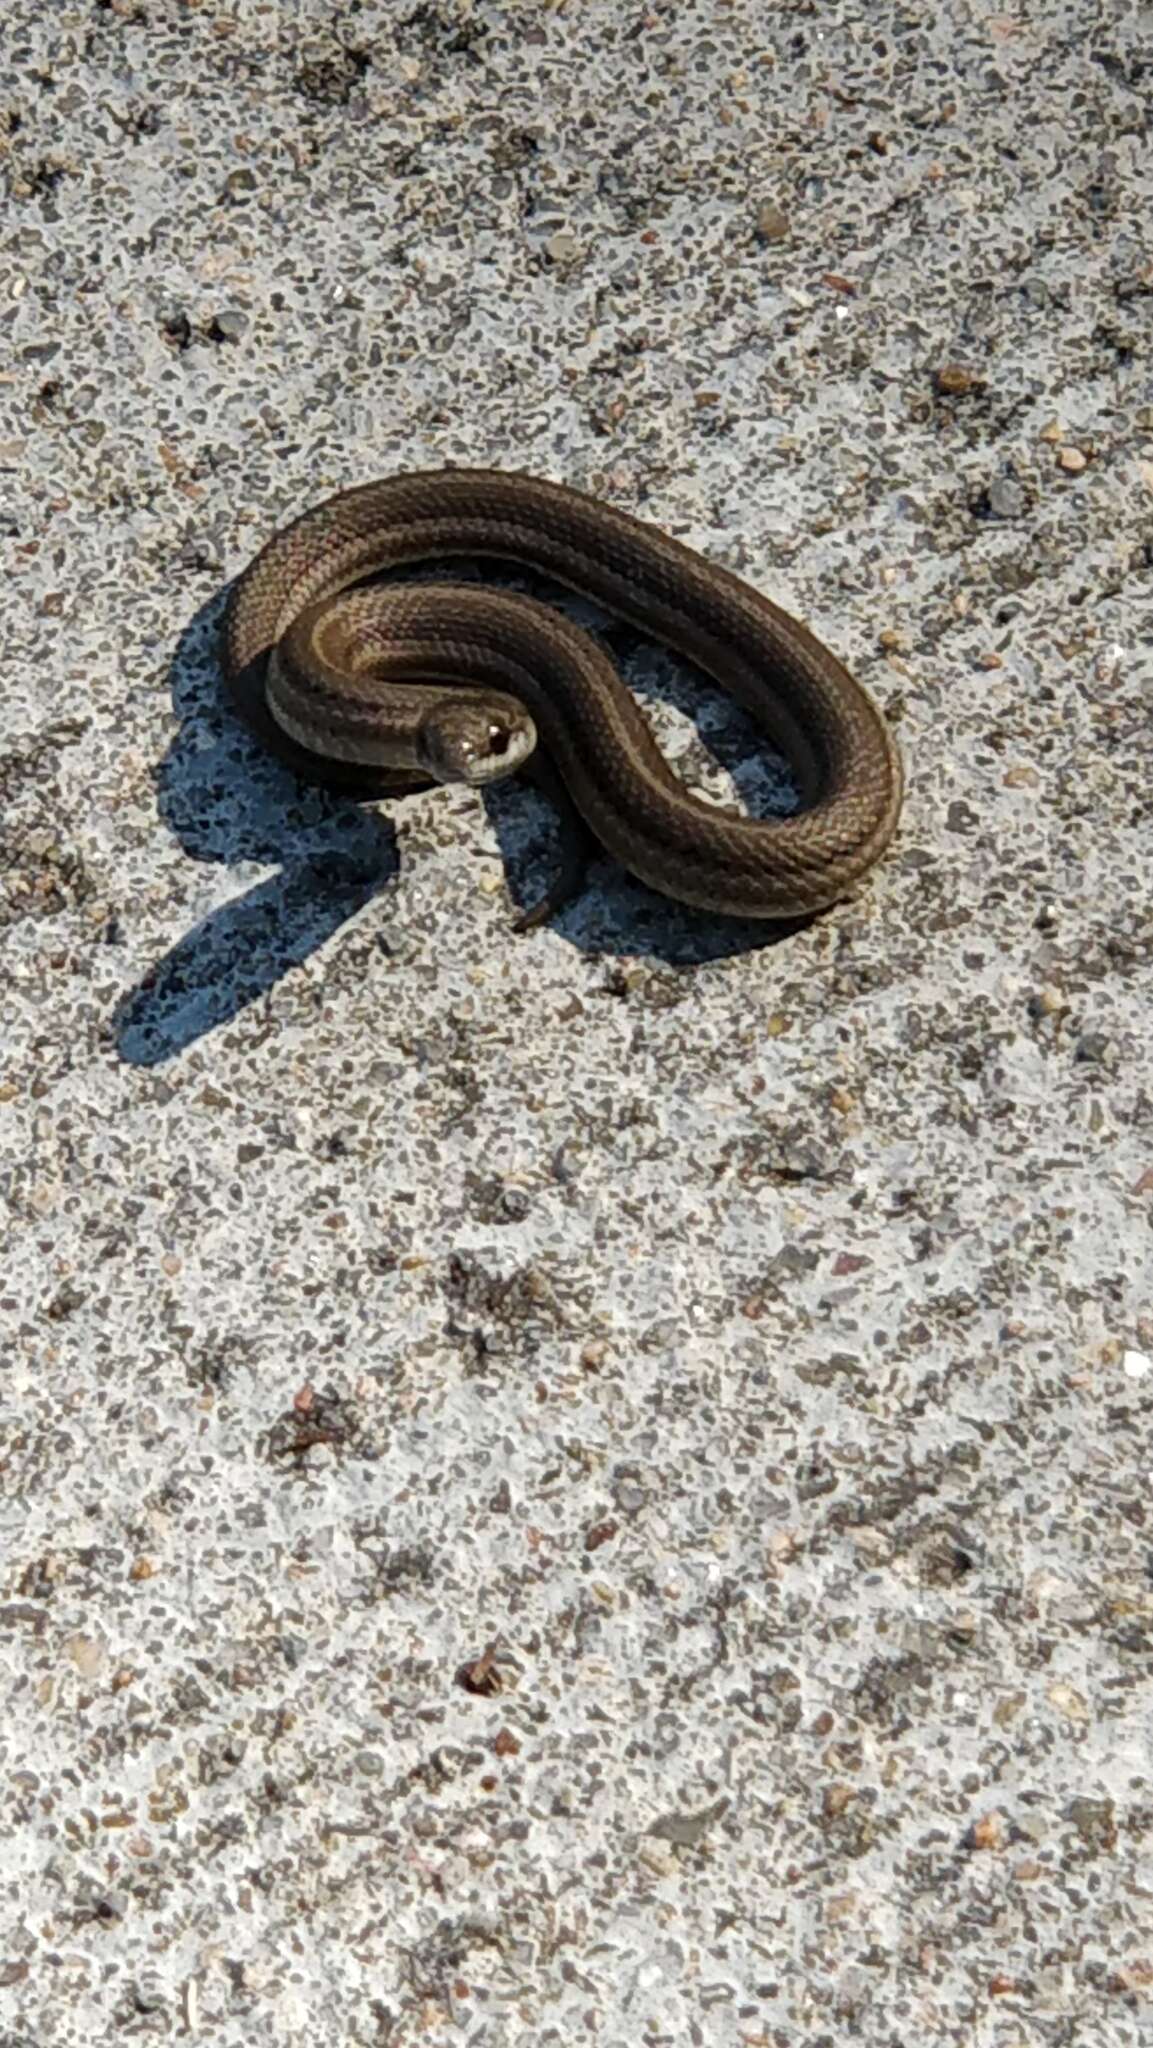 Image of Lined Snake